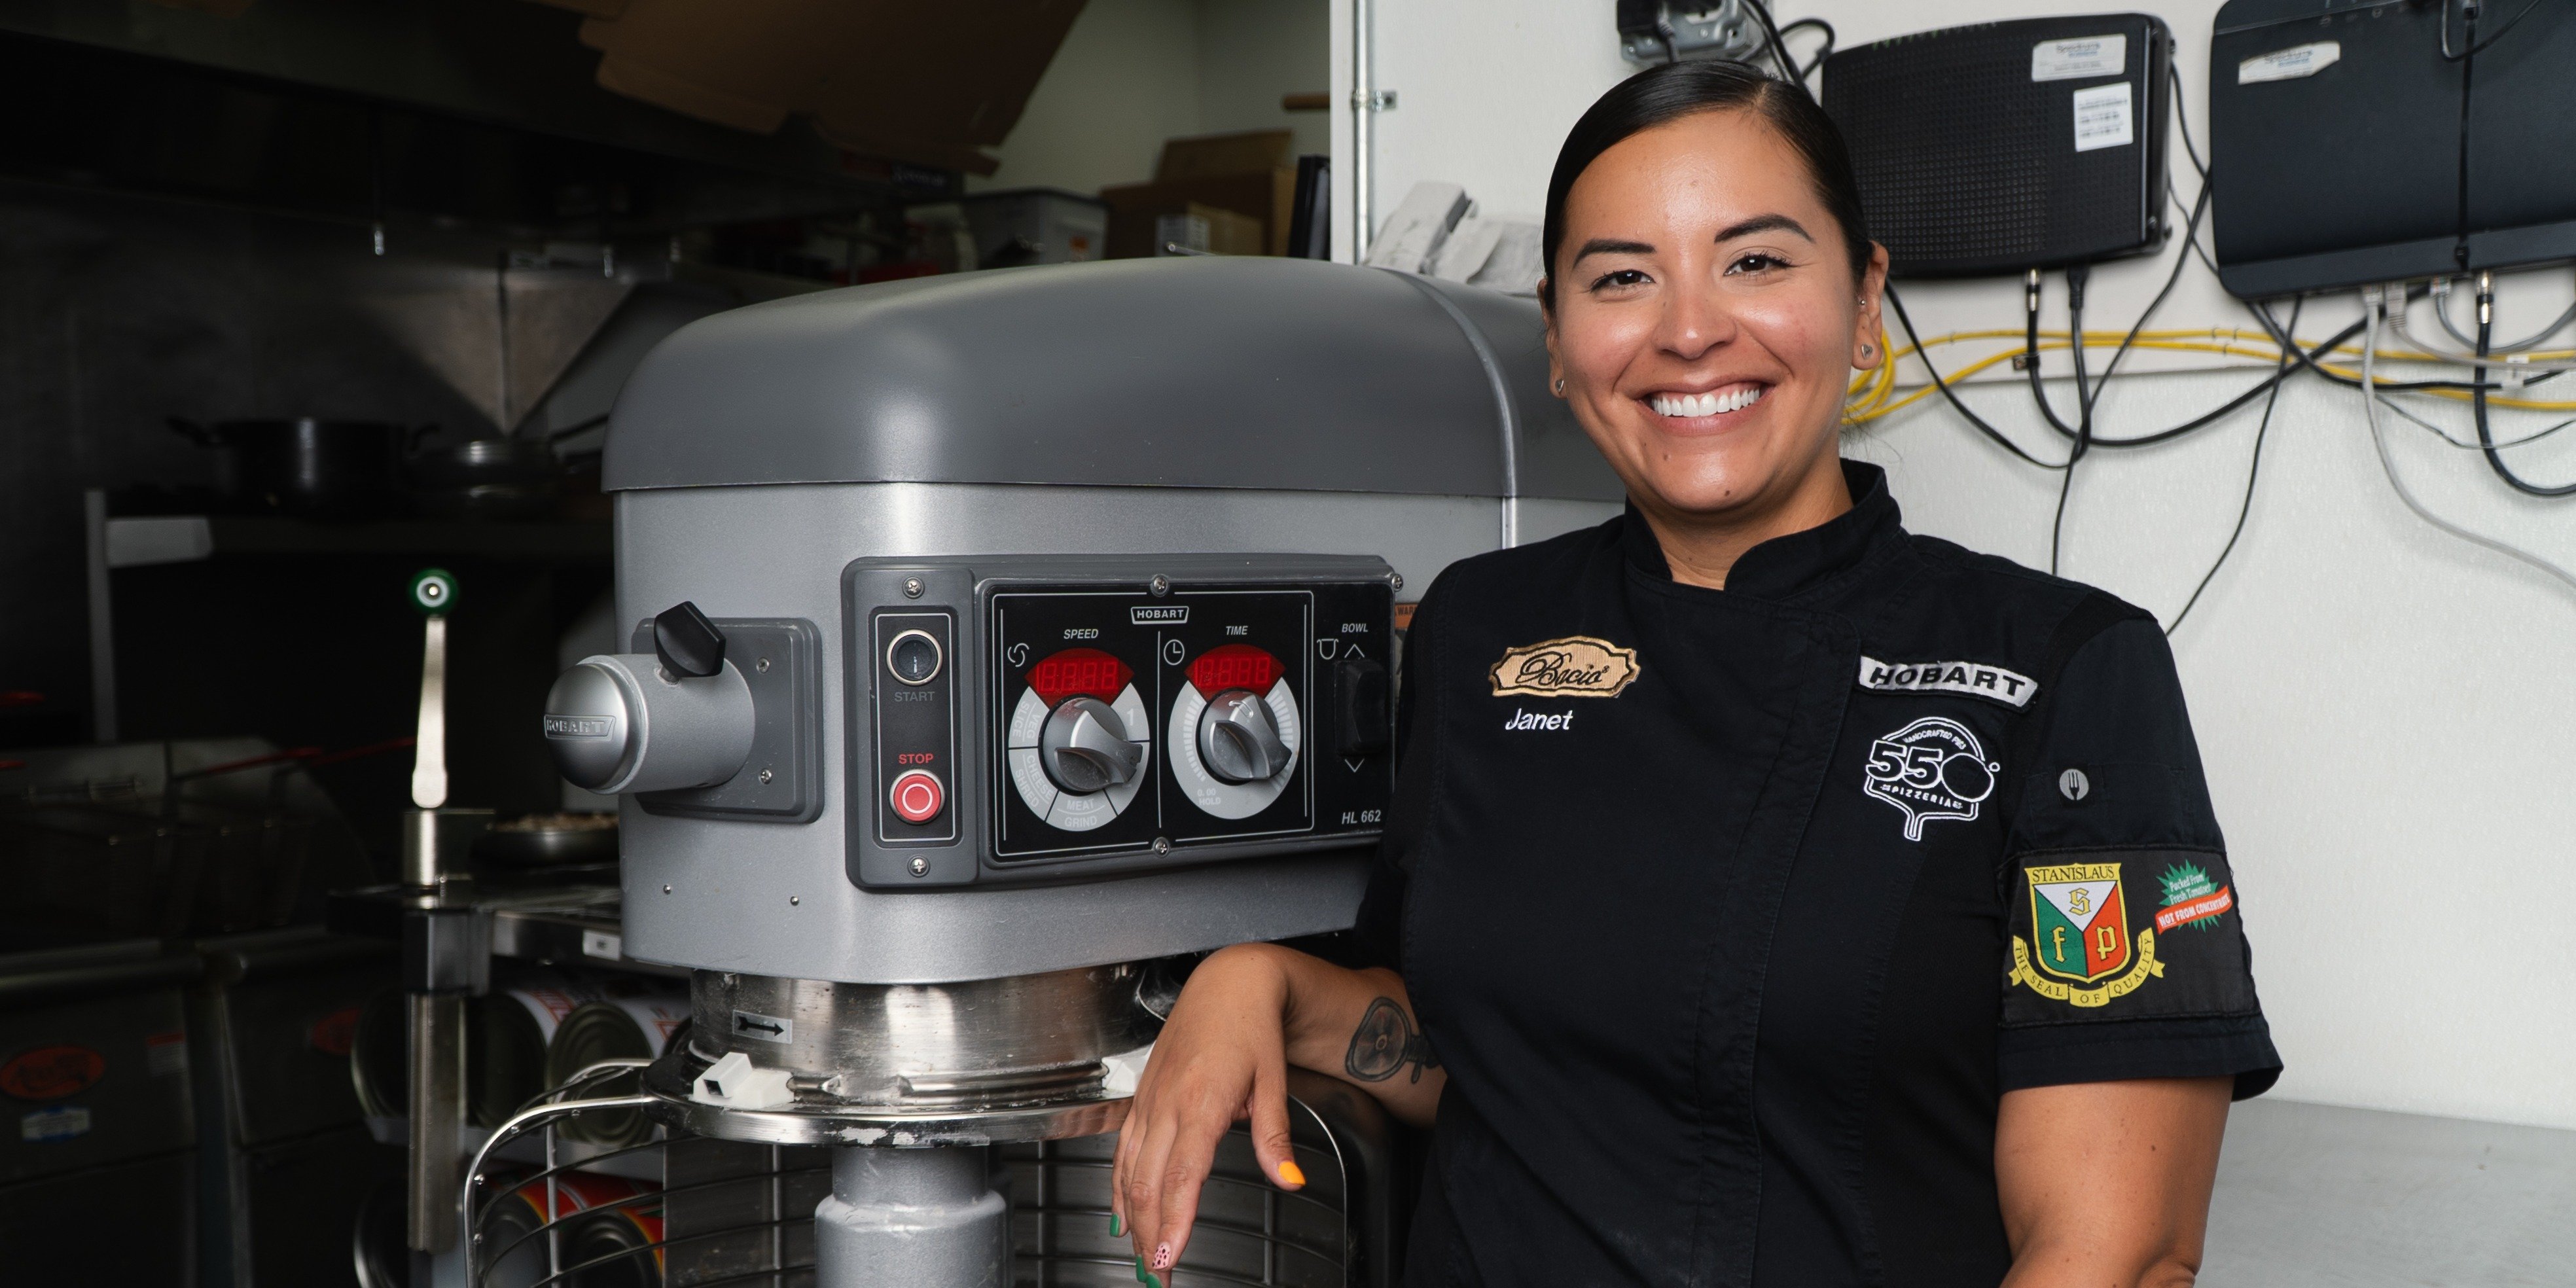 Janet Zapata poses with her Hobart HL662 commercial pizza dough mixer